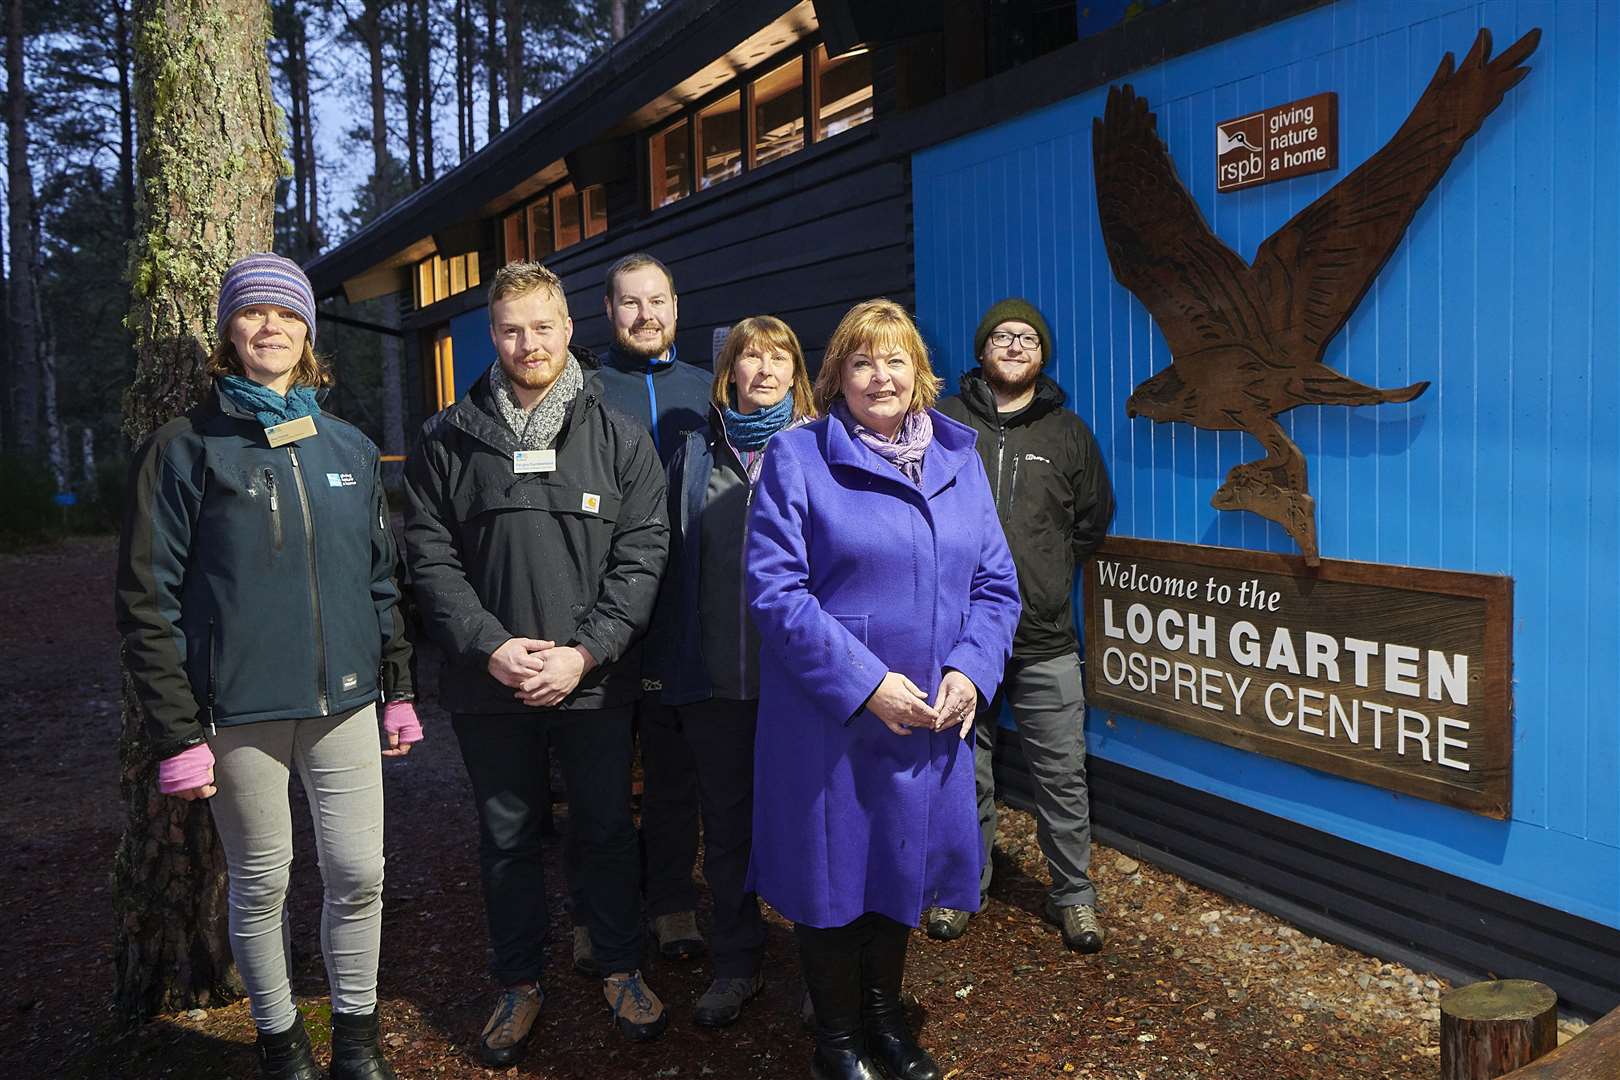 Scotland's tourism and culture secretary Fiona Hyslop at the Loch Garten nature reserve where she announced support for nine projects under the Natural Cultural and Heritage Fund. Picture: Ewen Weatherspoon / SNH